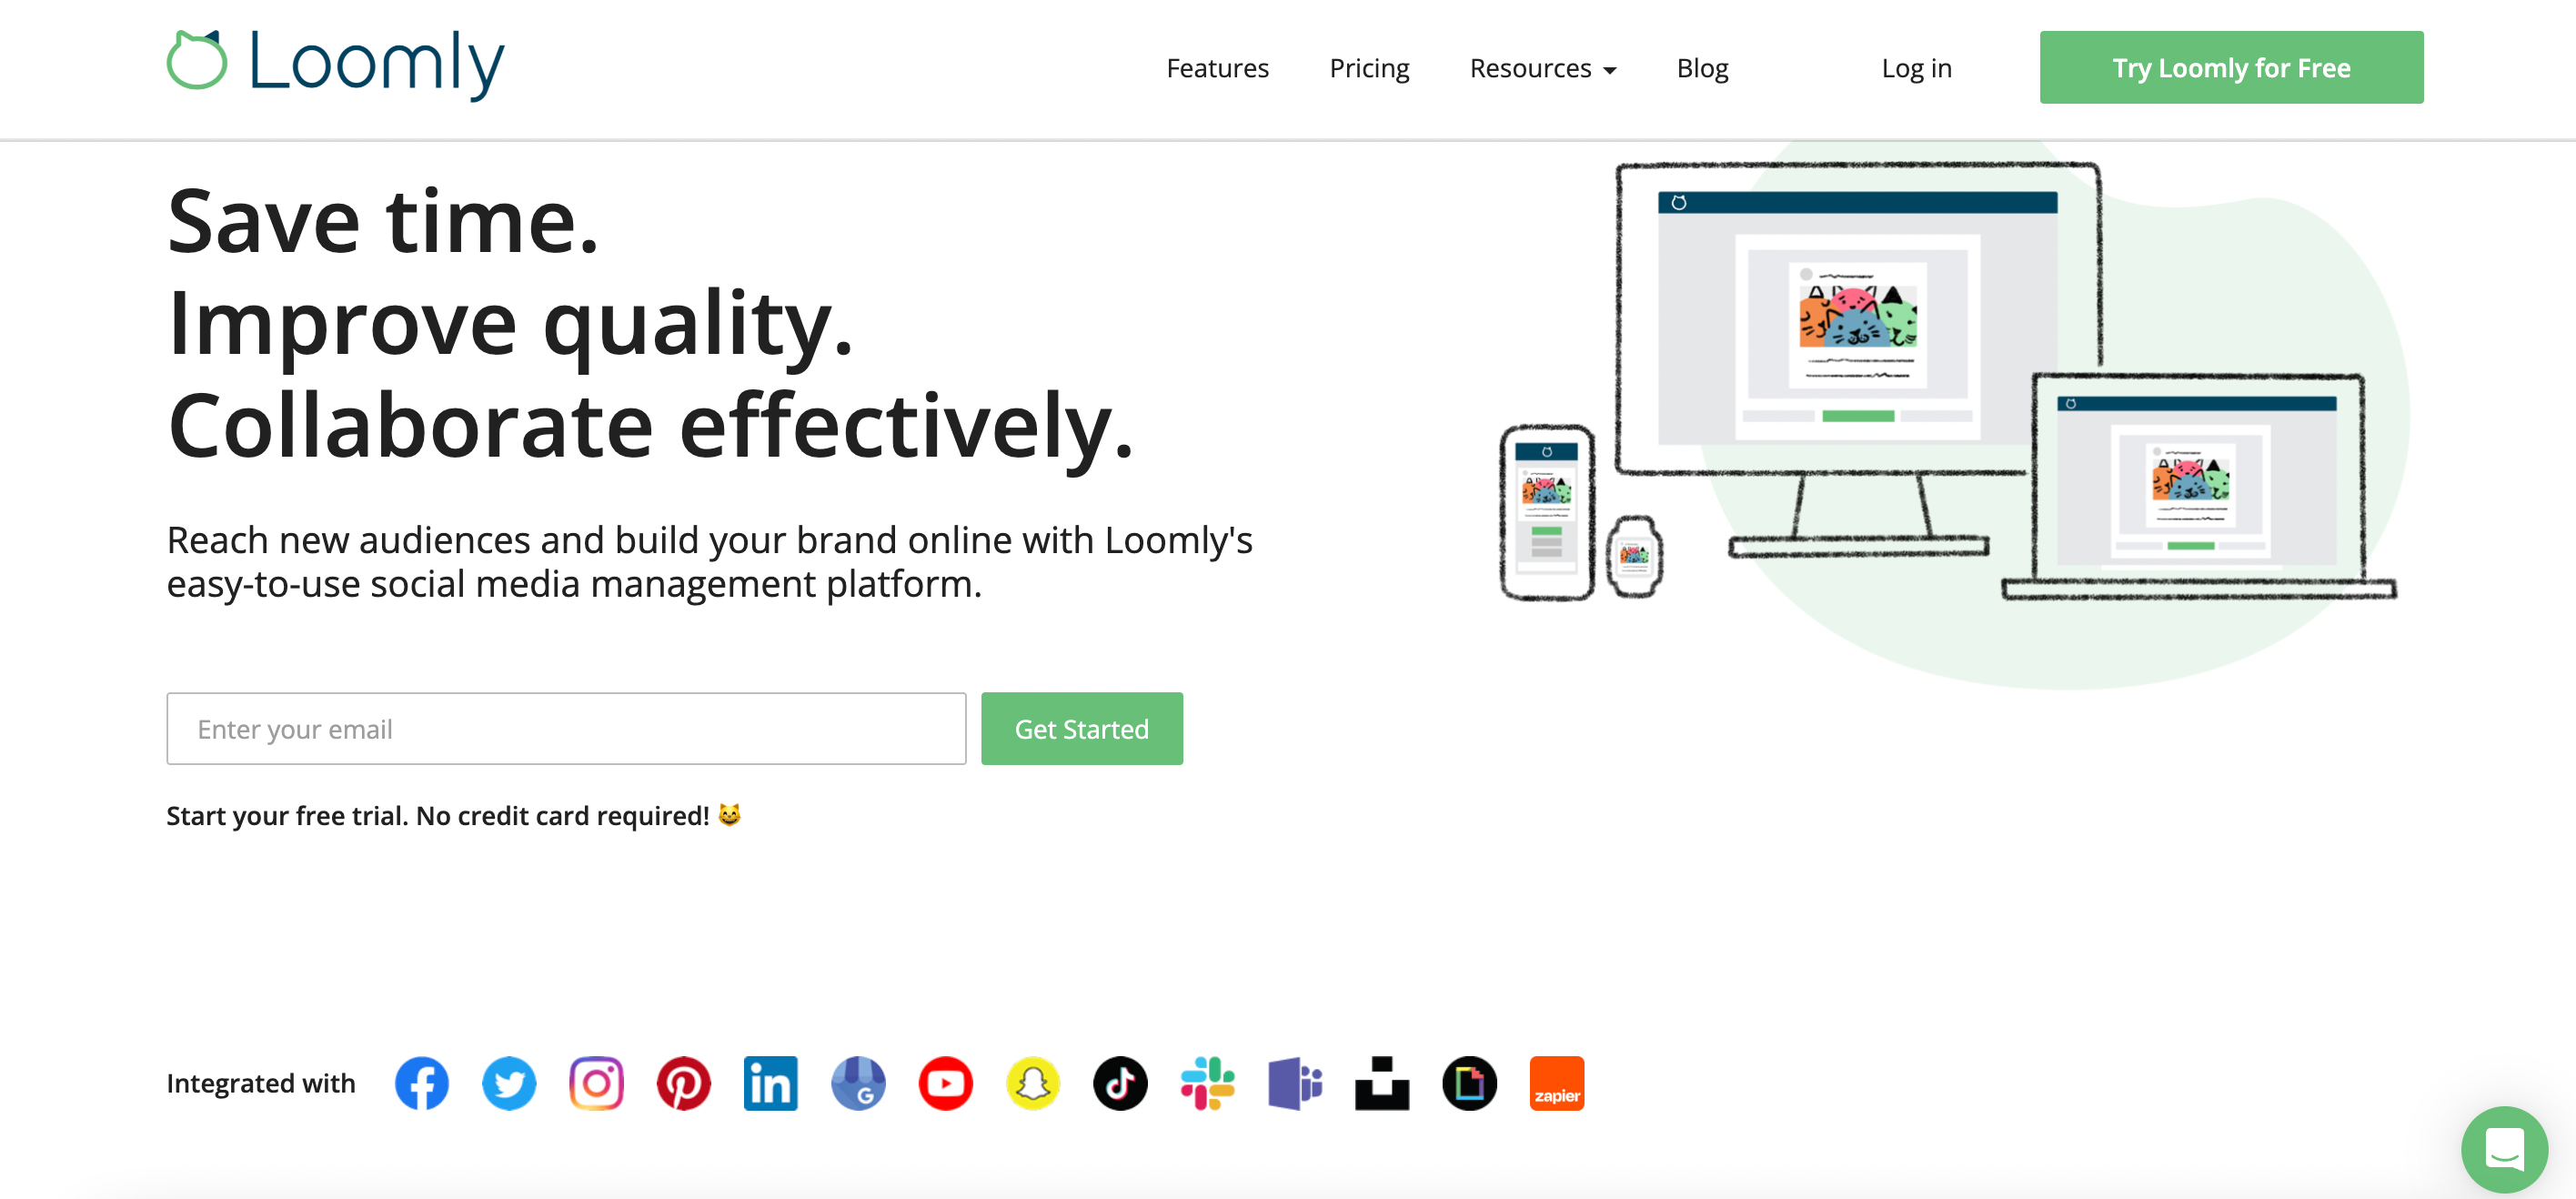 Loomly let's you to collaborate freely on many platforms.